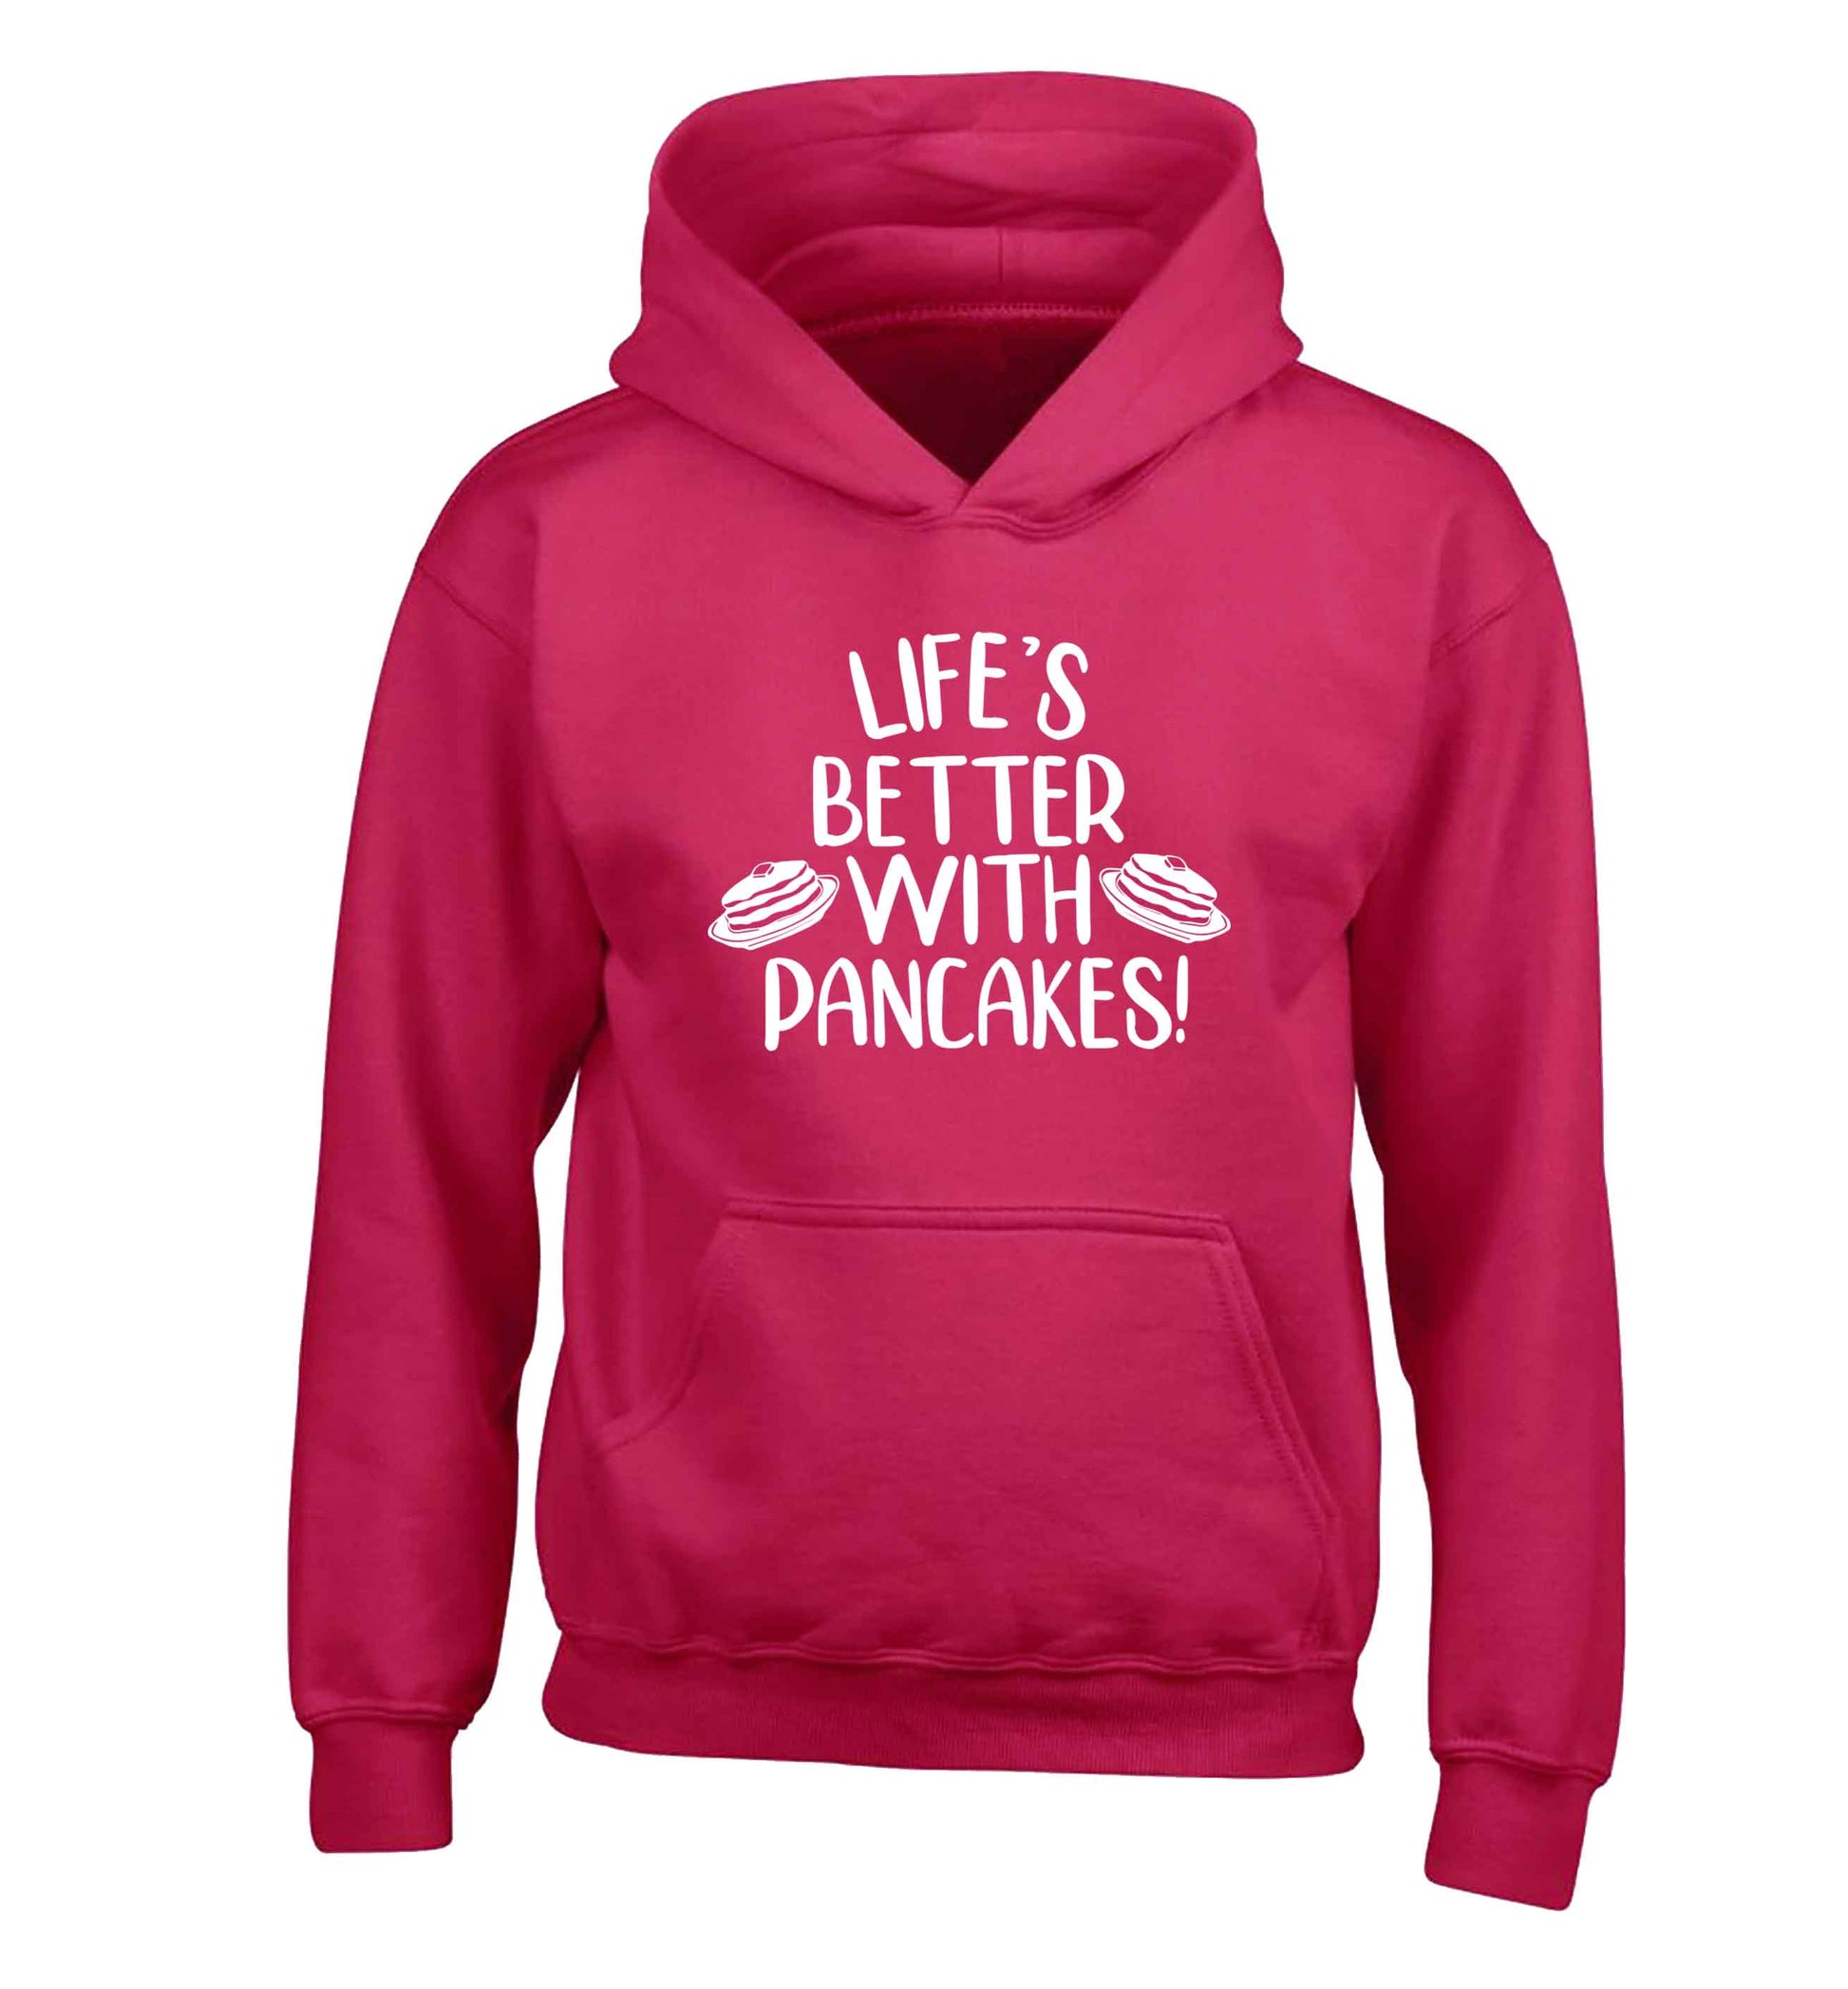 Life's better with pancakes children's pink hoodie 12-13 Years